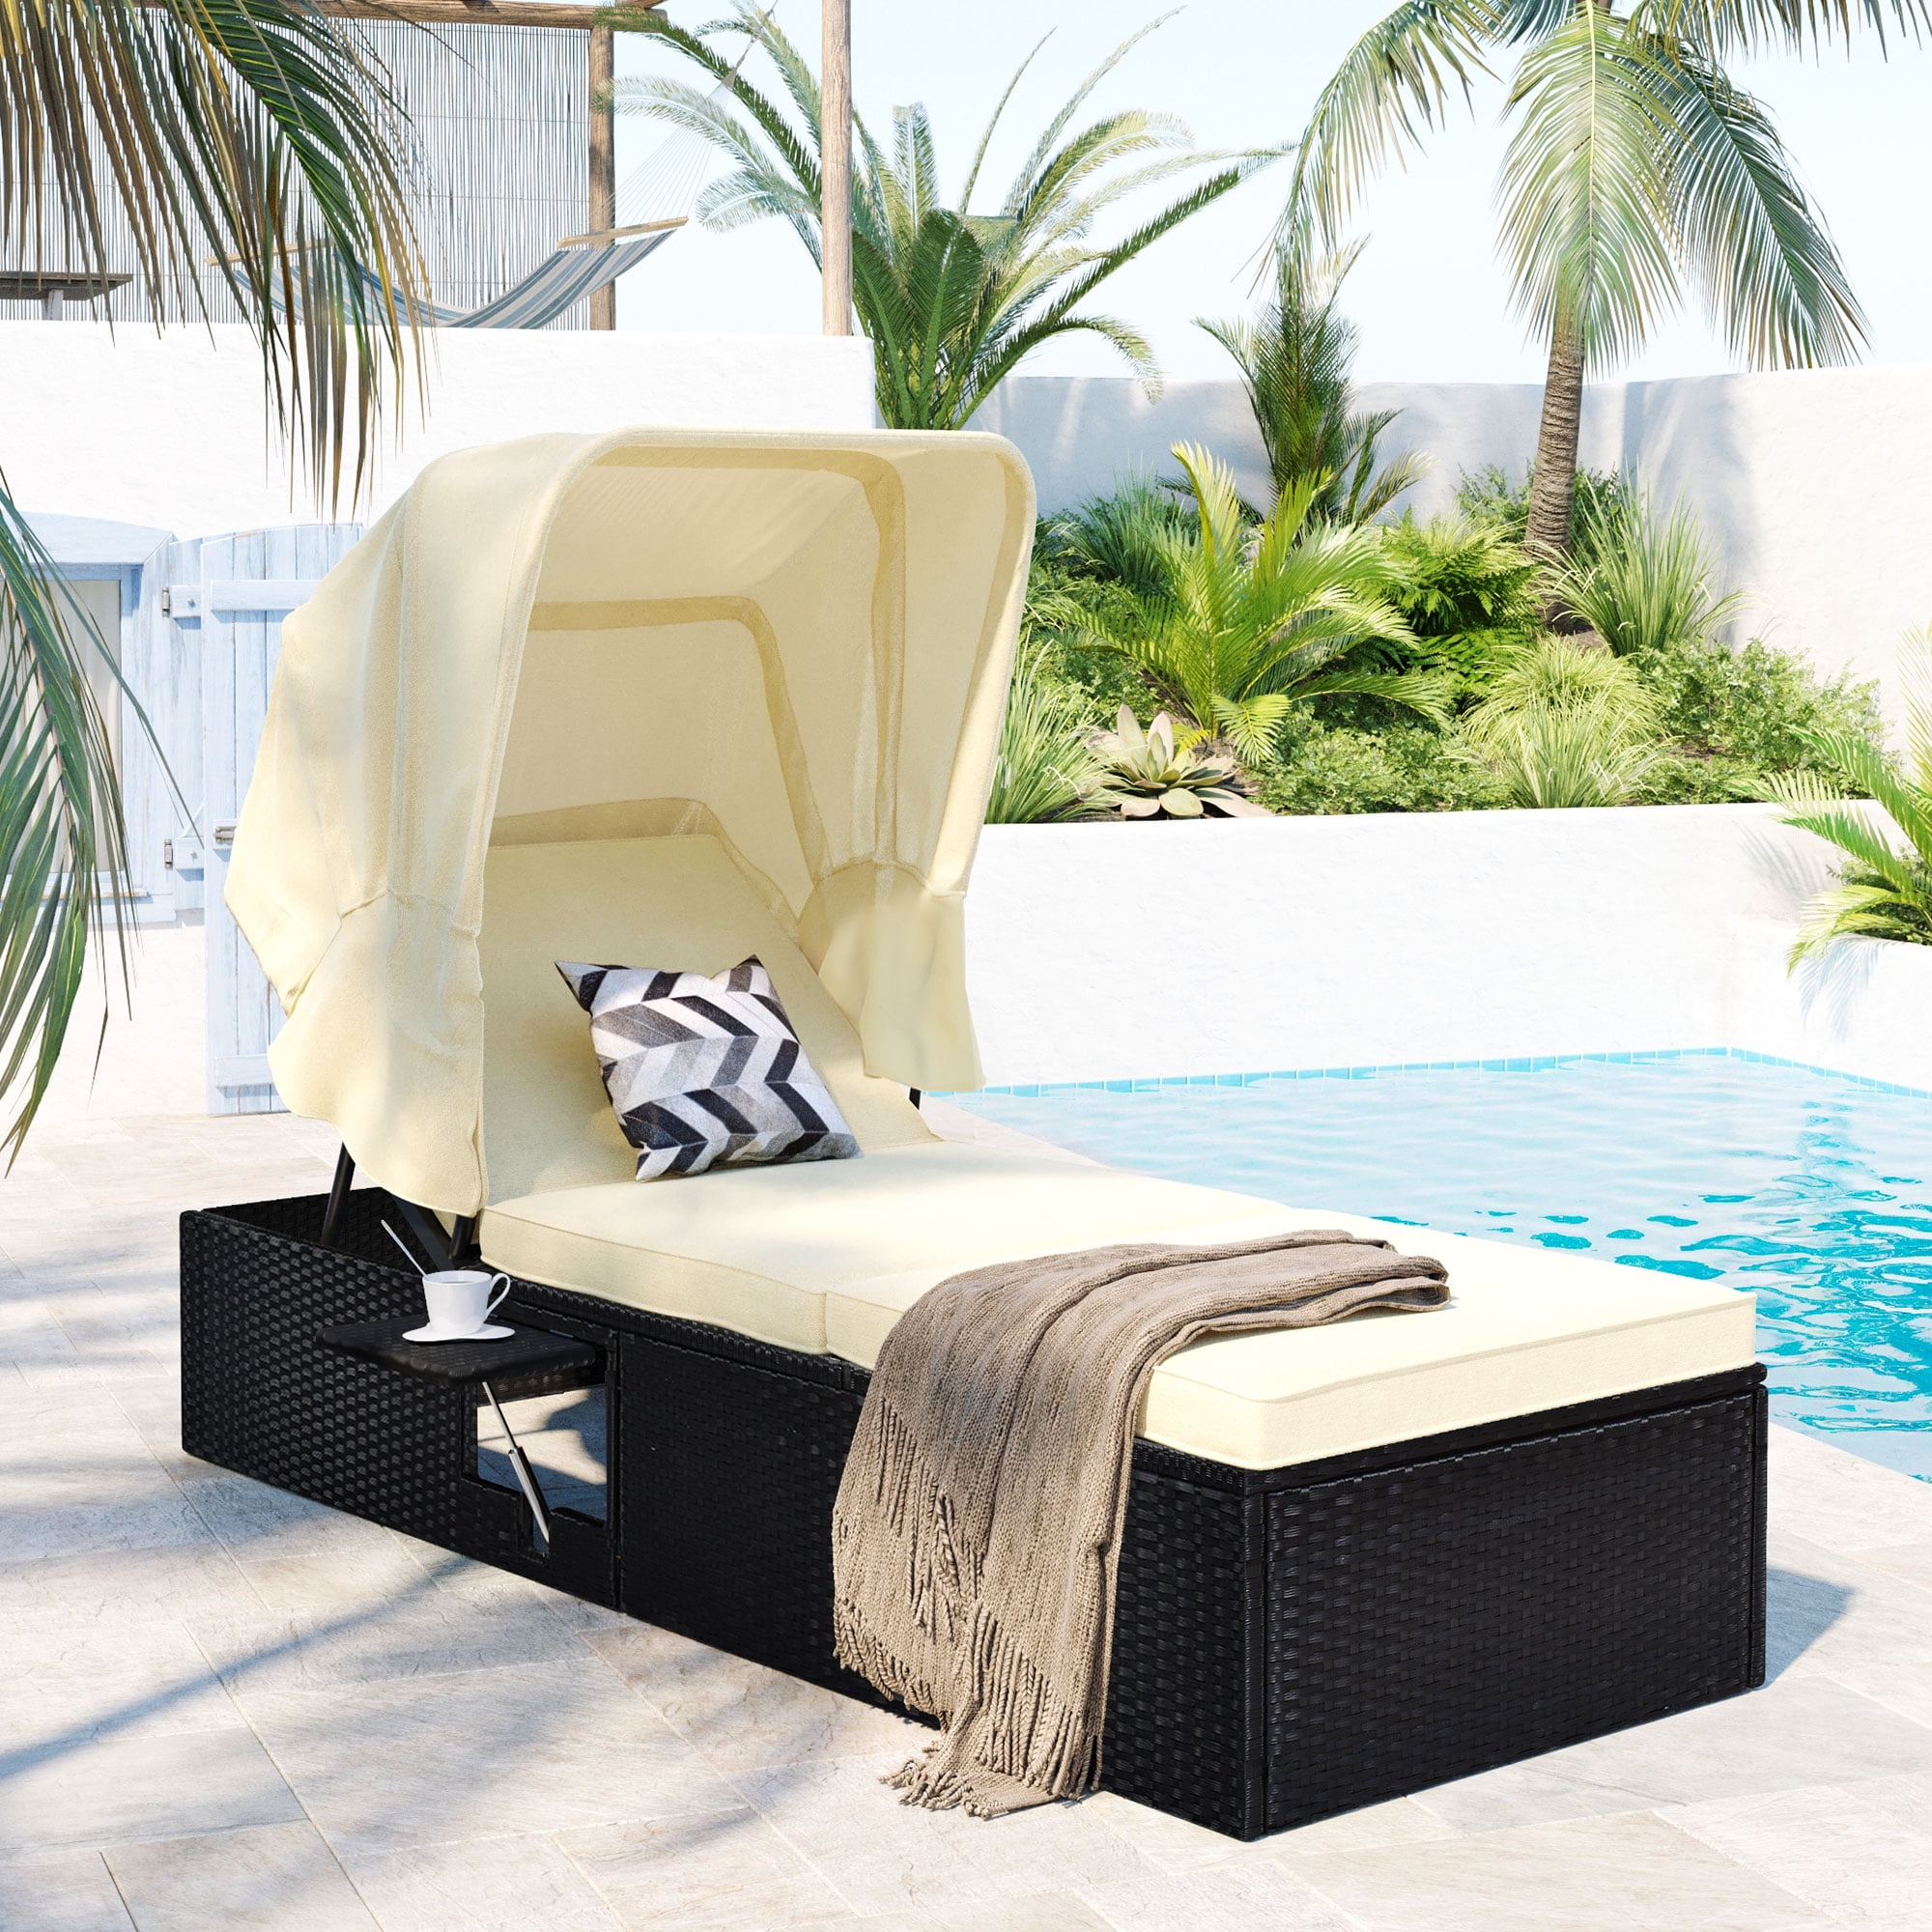 Details about   Patio Folding Sun Lounger Rattan Day Bed Outdoor Pool Lounge Chair Furniture Set 